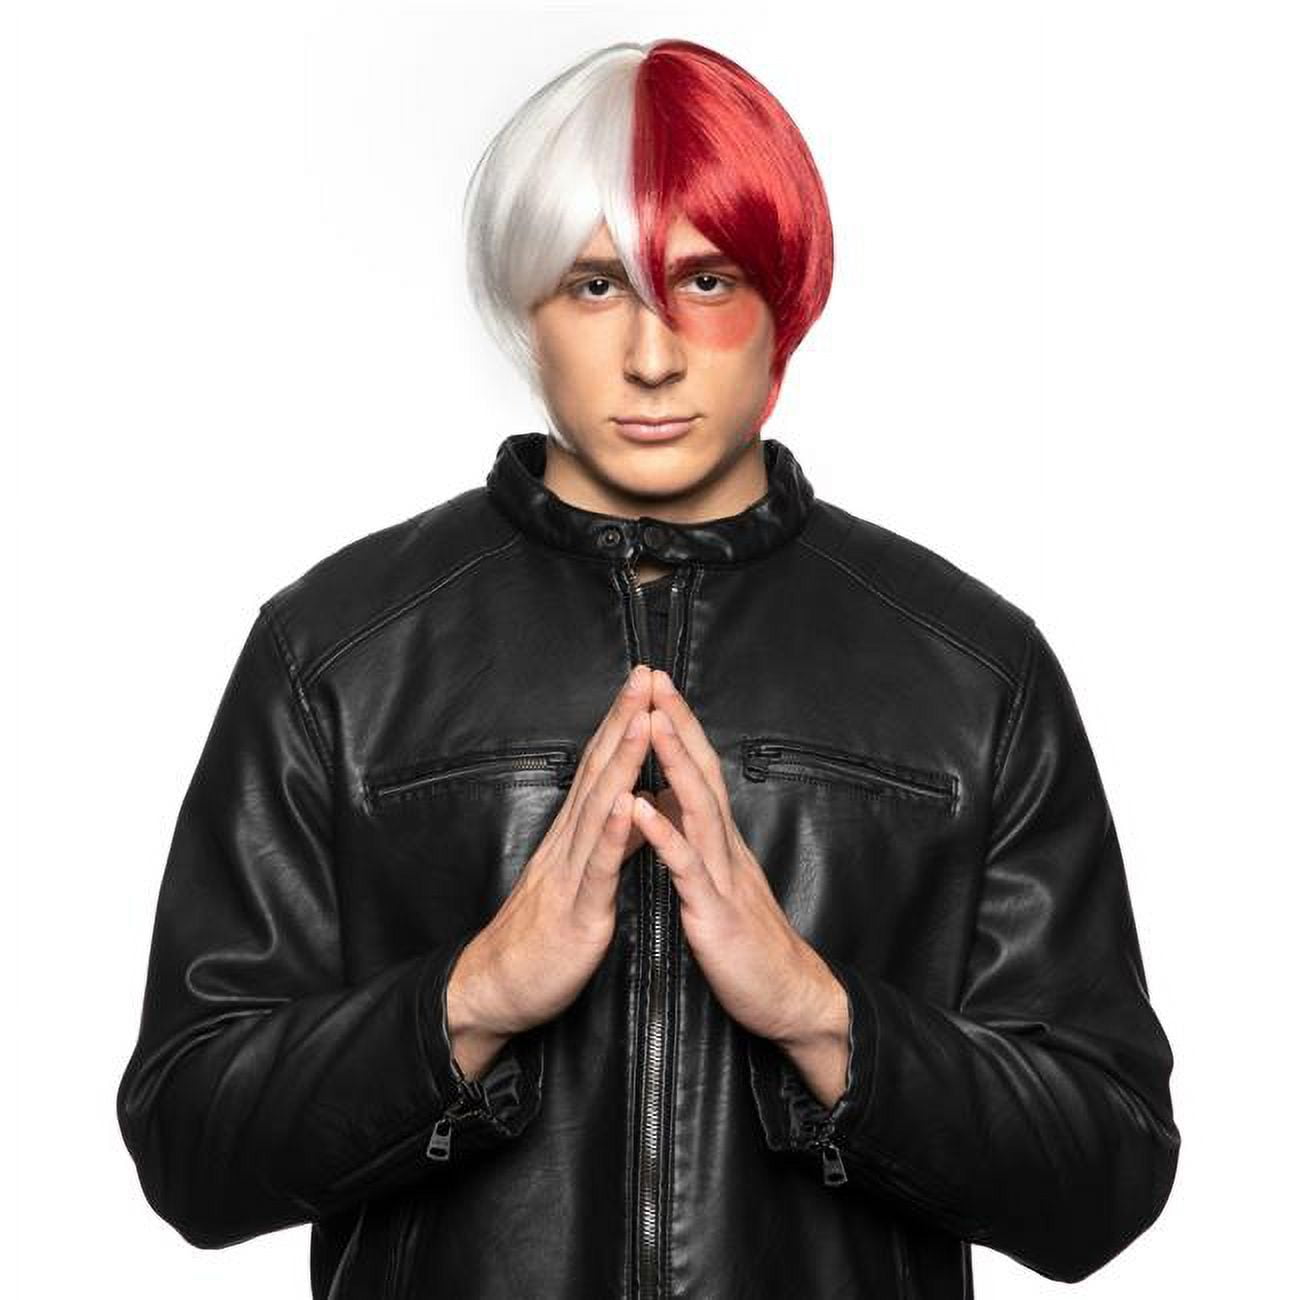 00443 RD-WH My Hero Academia Character - Shoto Todoroki Wig, Red & White -  Enigma, 00443 RD/WH